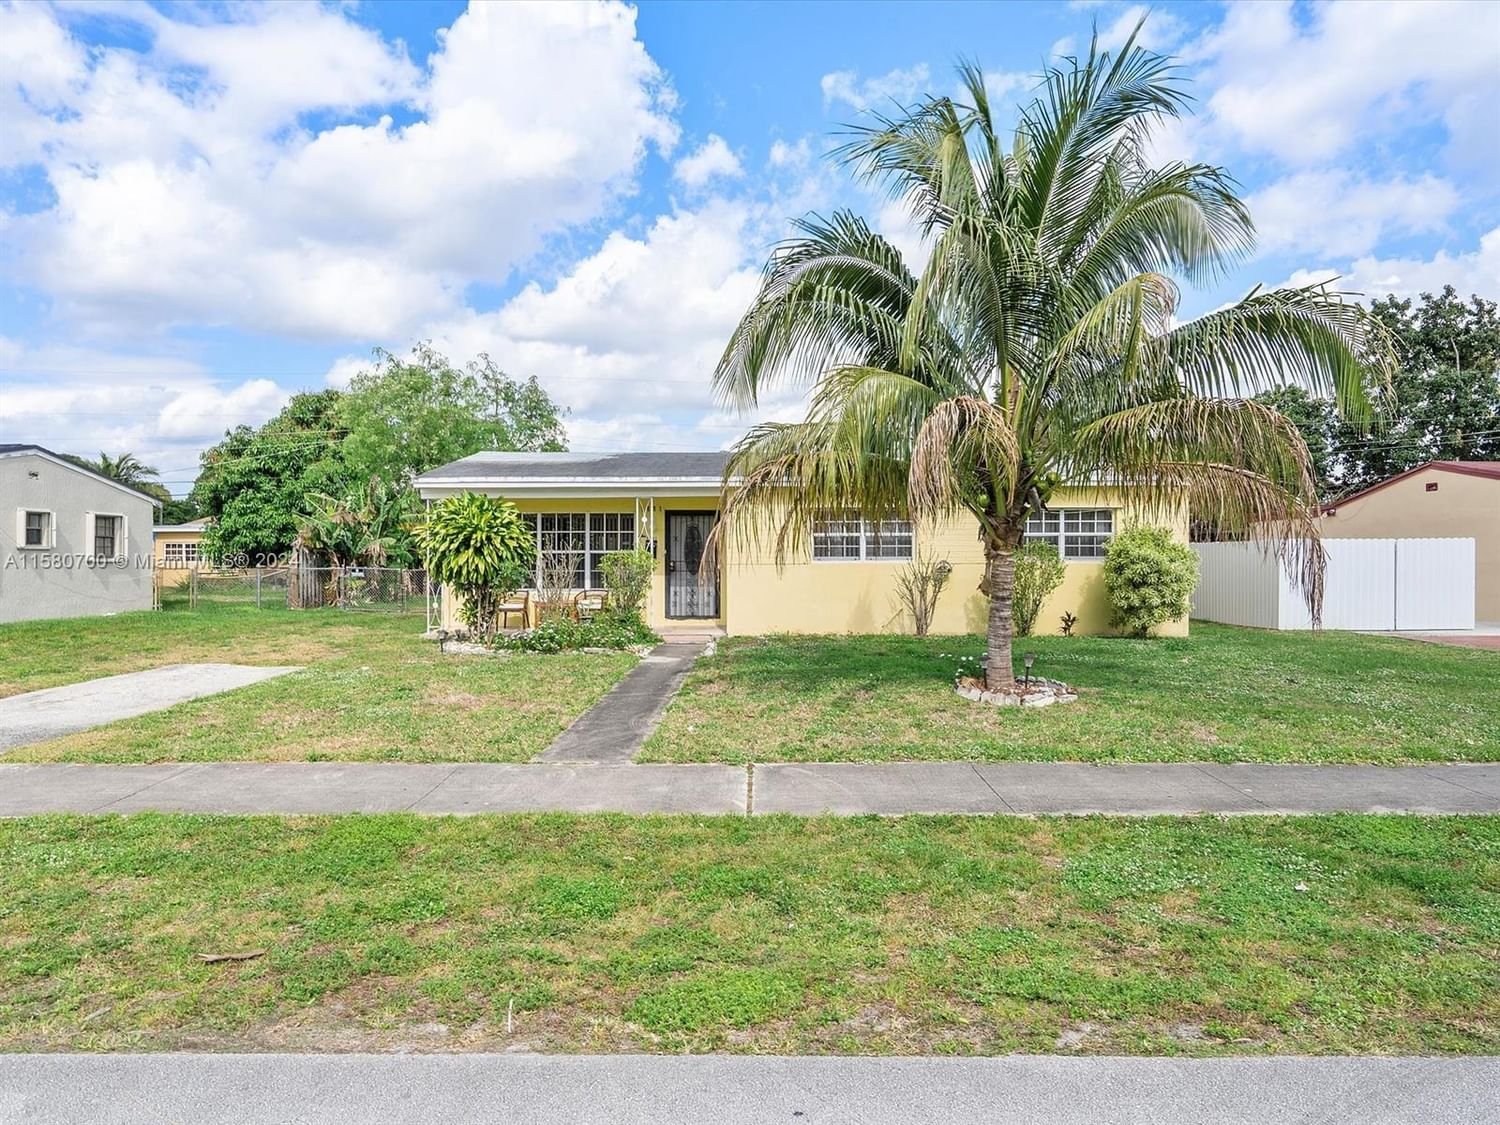 Real estate property located at 1081 184 Drive, Miami-Dade County, NORWOOD 3RD ADDN SEC 2, Miami Gardens, FL